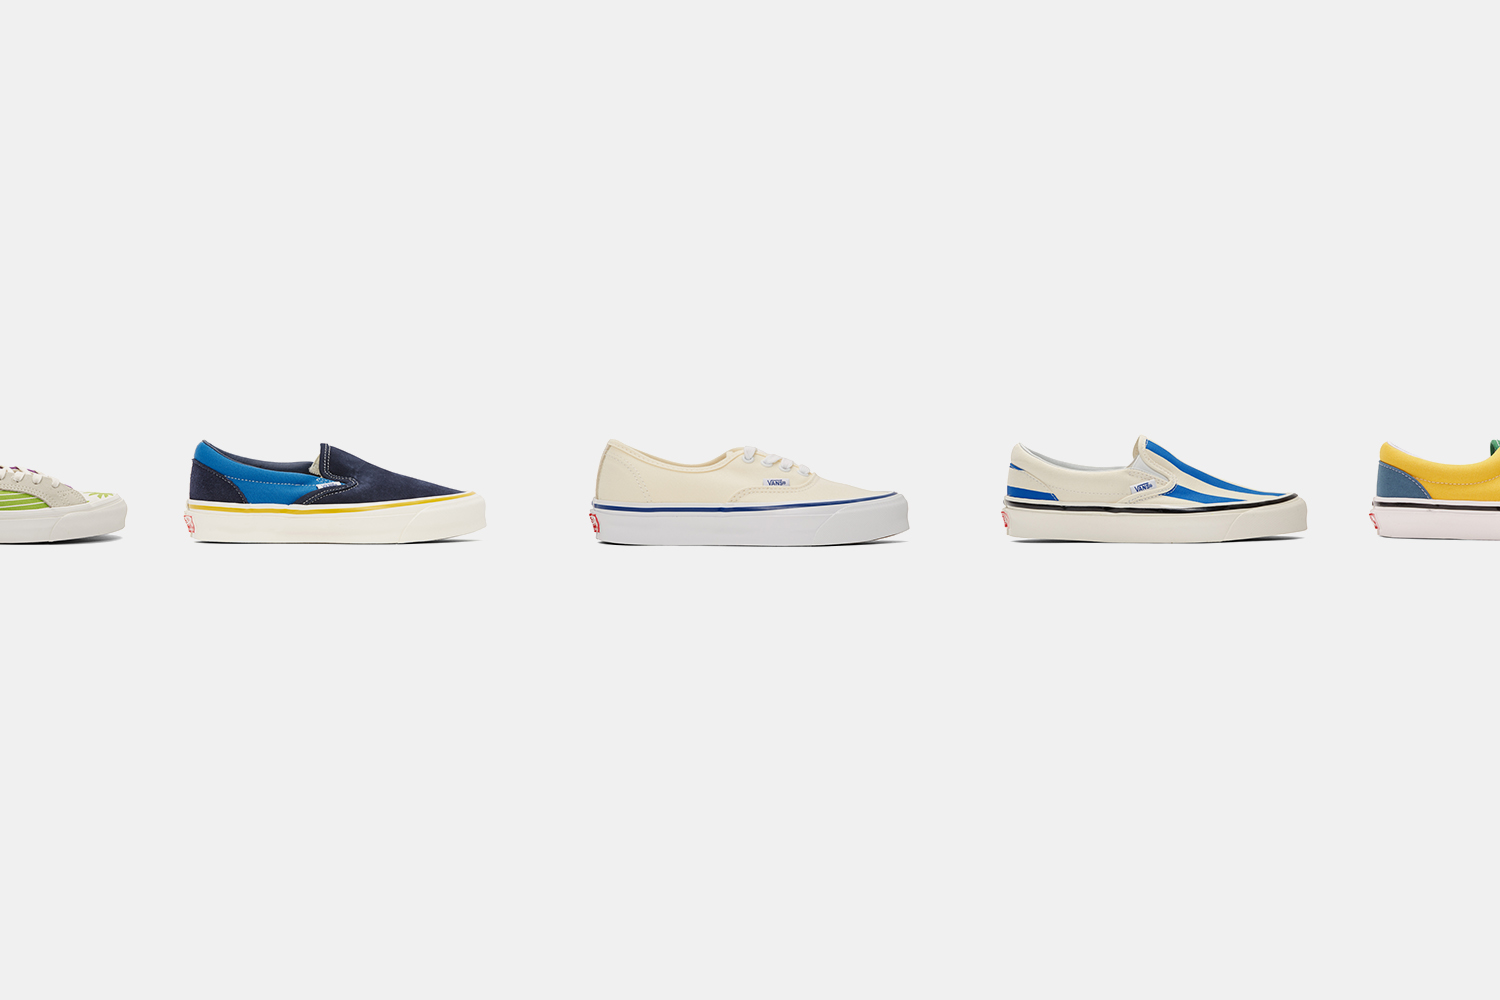 Deal: A Bunch of Fun, Colorful Vans Are on Sale at Ssense